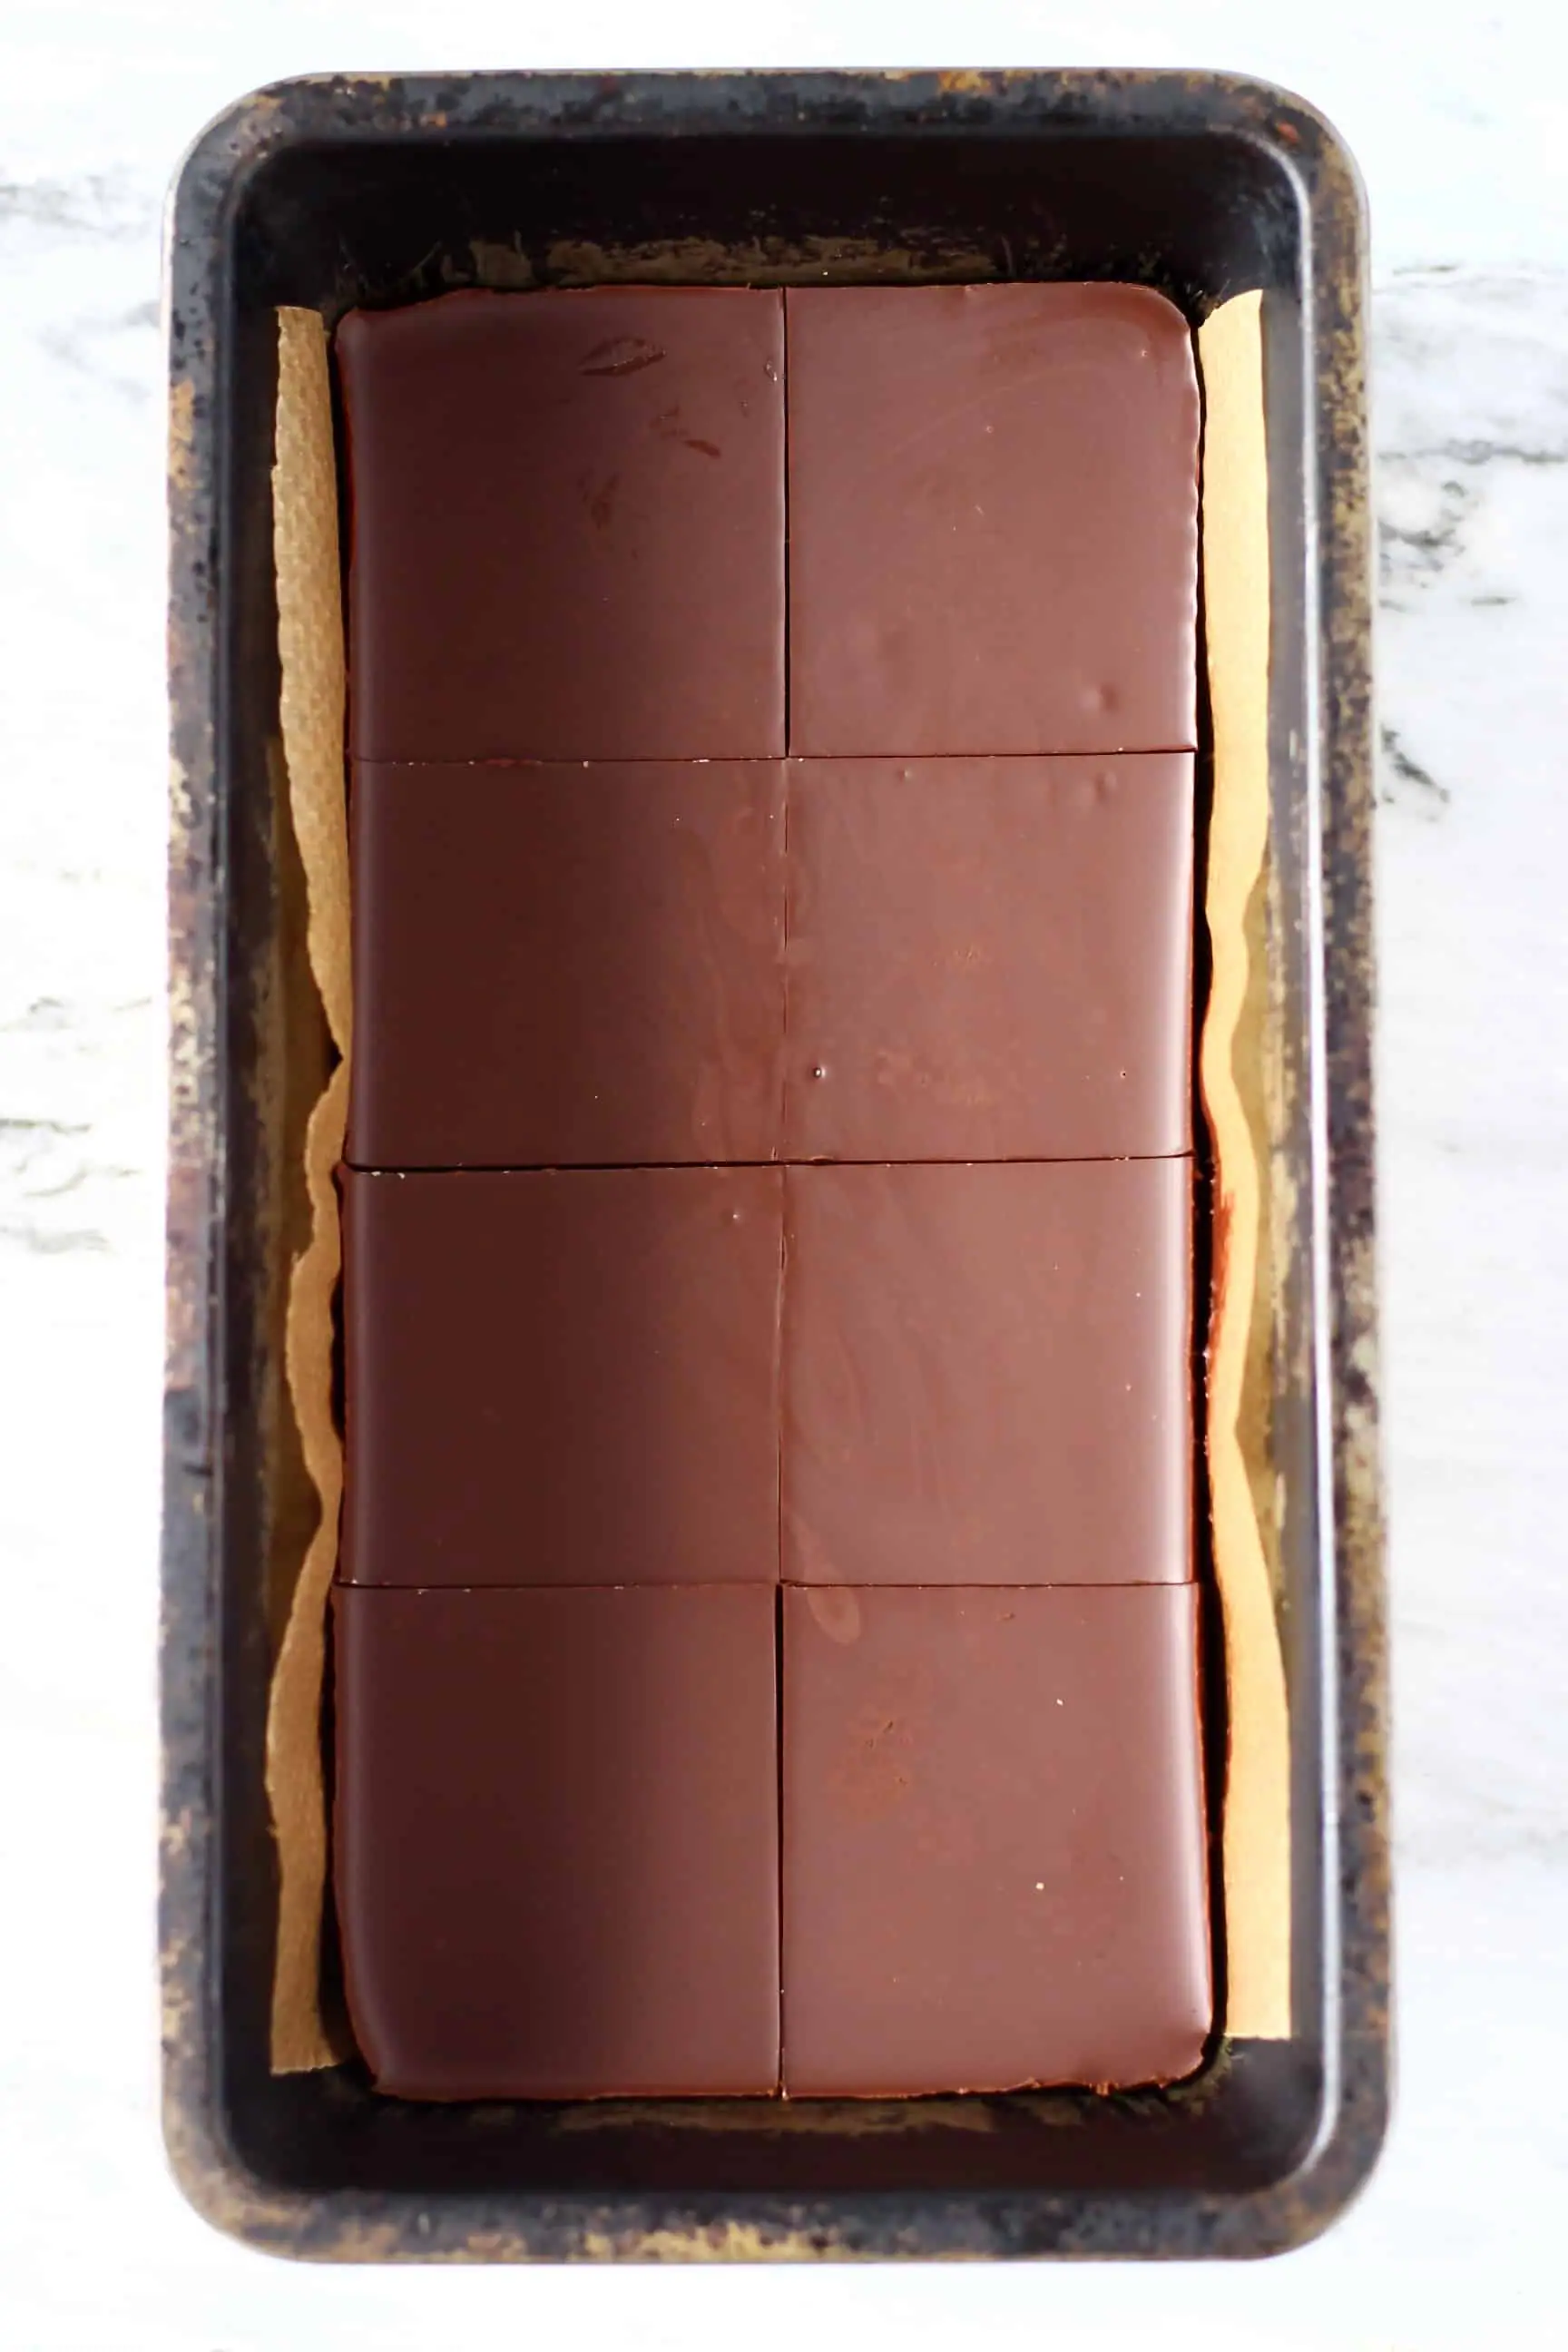 Chocolate peanut butter bars in a loaf tin cut into eight squares